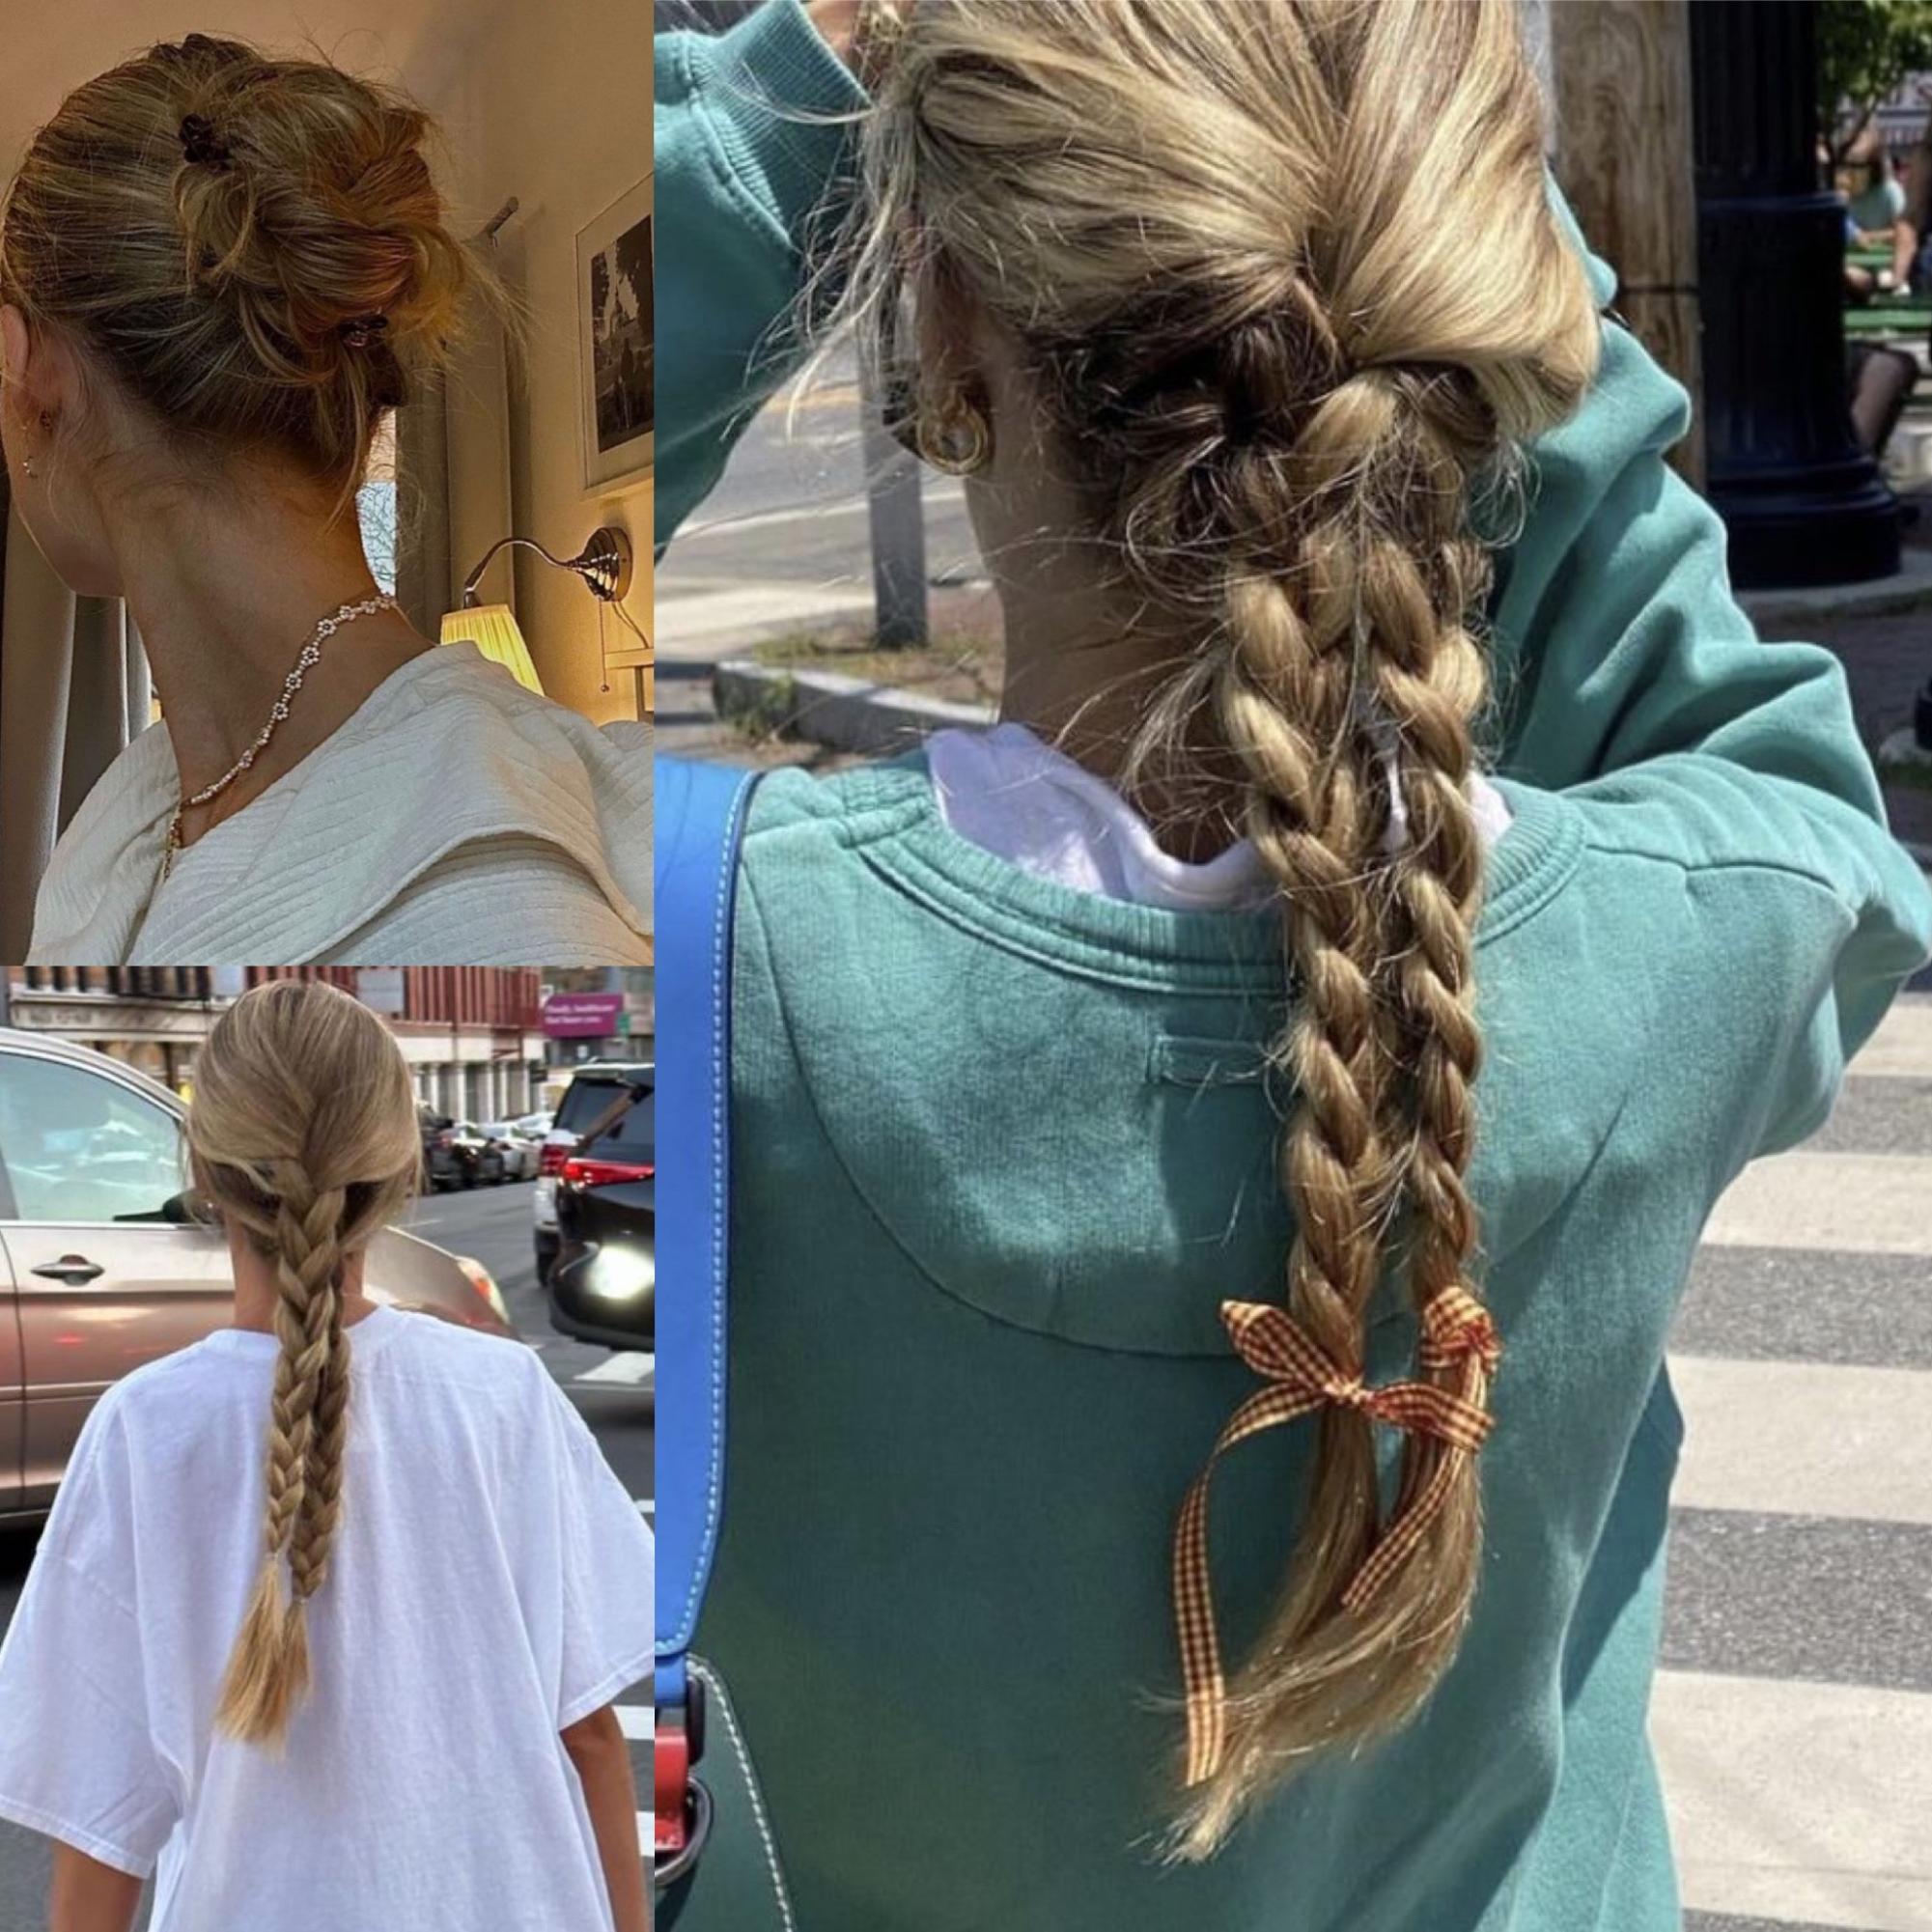 Changes Hair Studio - Dutch braids vs French braids When a french braid is  done, the braid sits flat against the head, pictured here is a dutch braid.  Another name for this